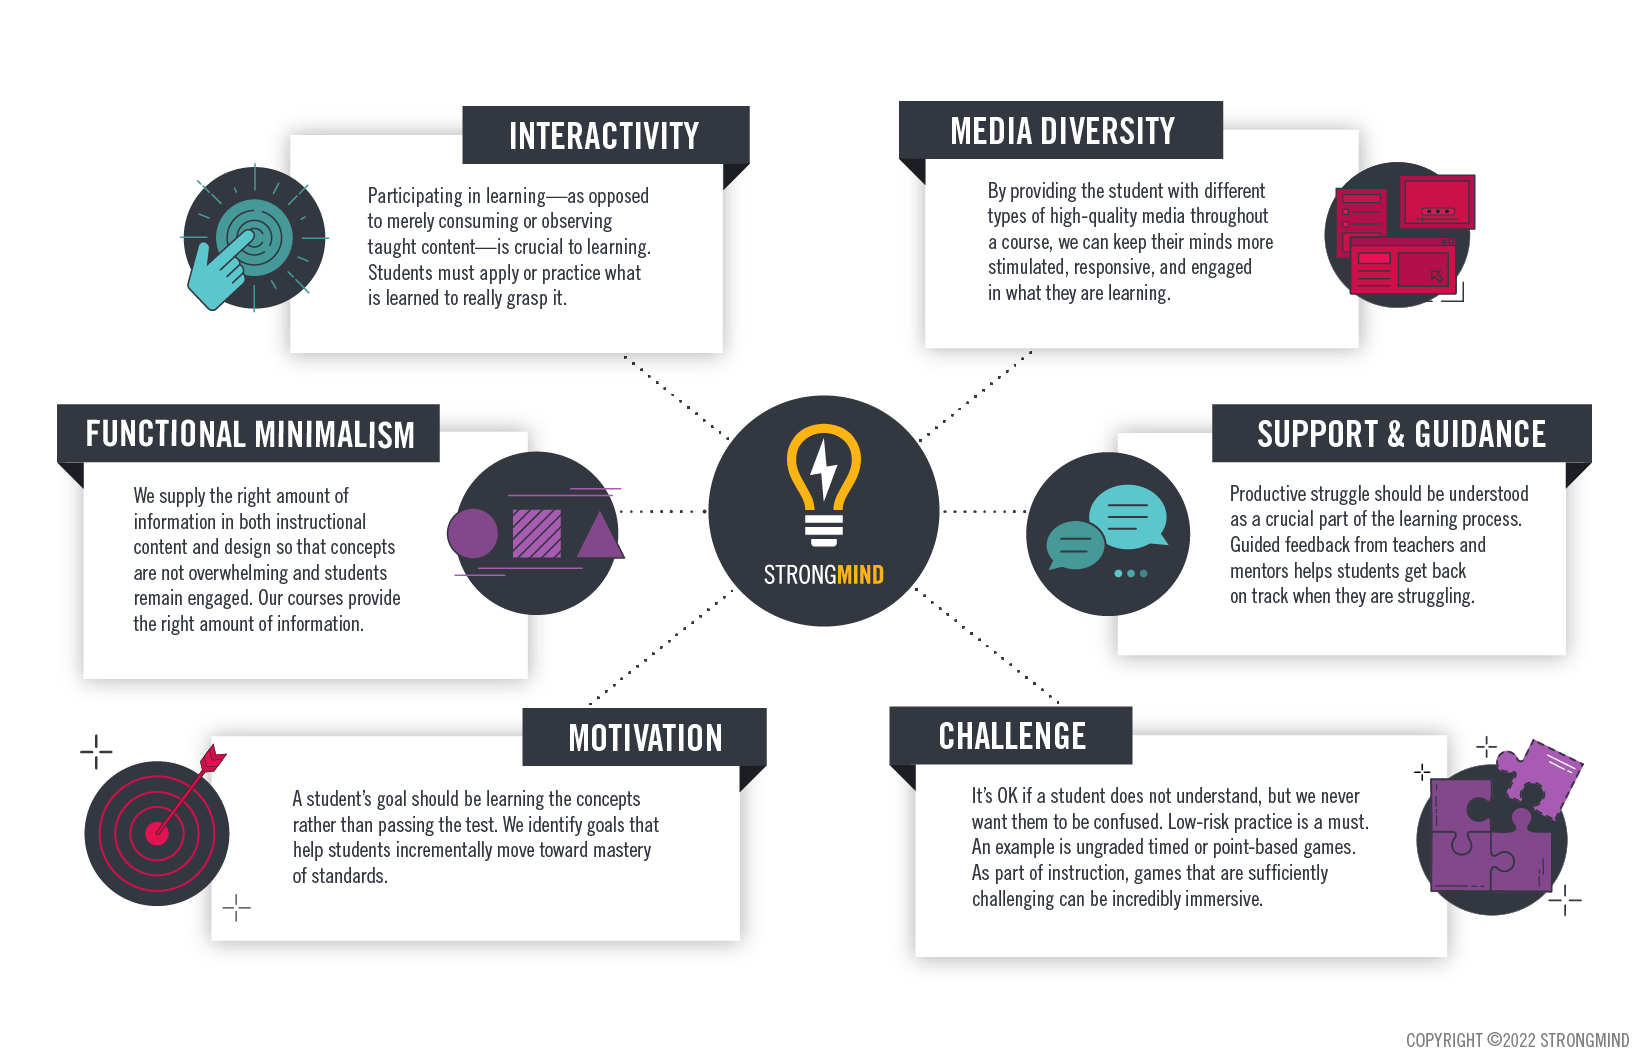 Graphic showing how StrongMind immerses students: Media diversity, support & guidance, appropriate challenge, motivation, interactivity, and functional minimalism